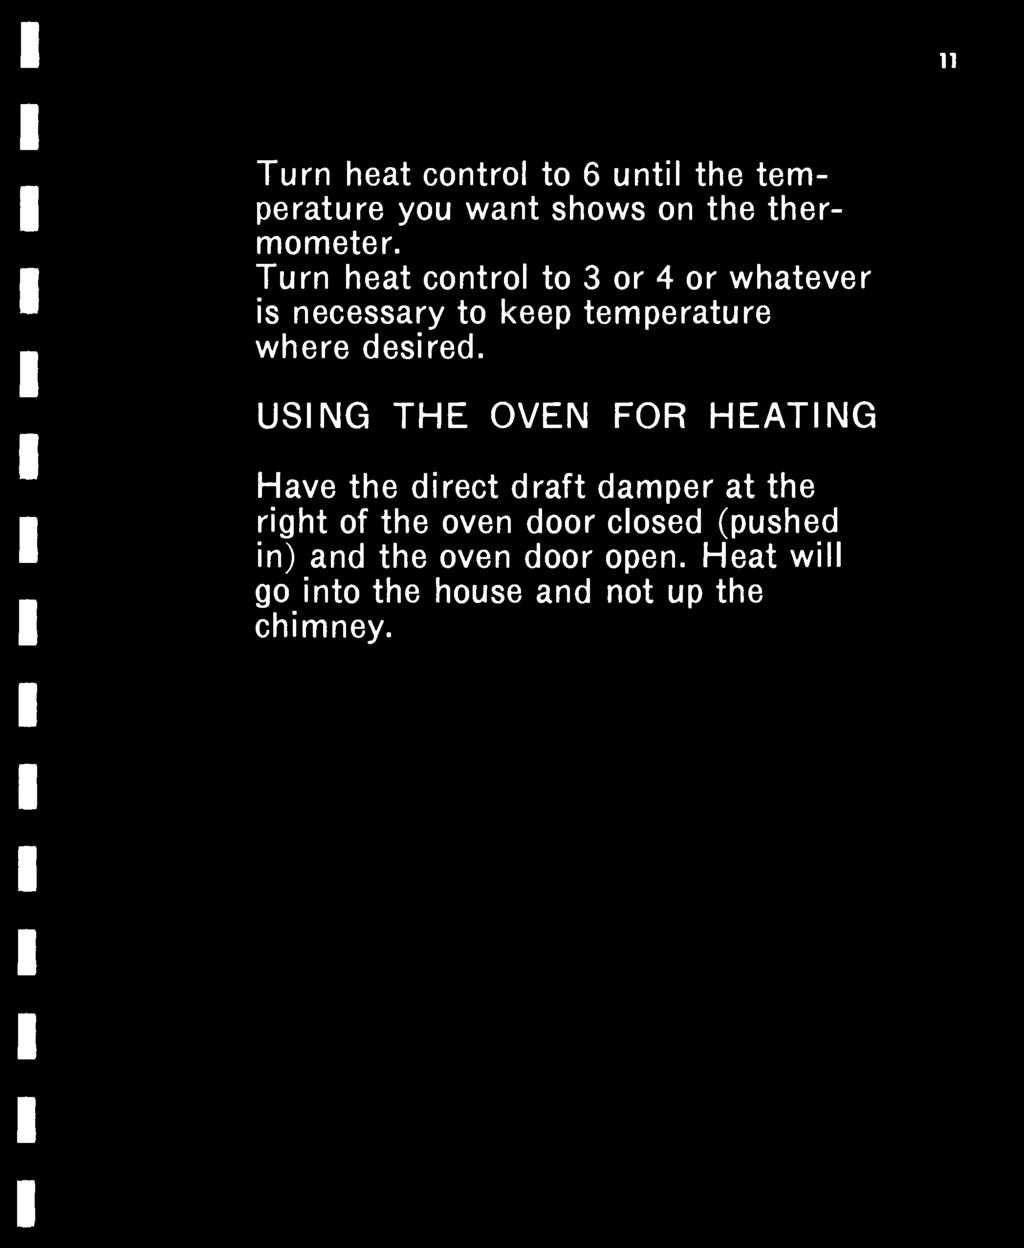 11 Turn heat control to 6 until the temperature you want shows on the thermometer. Turn heat control to 3 or 4 or whatever is necessary to keep temperature where desired.